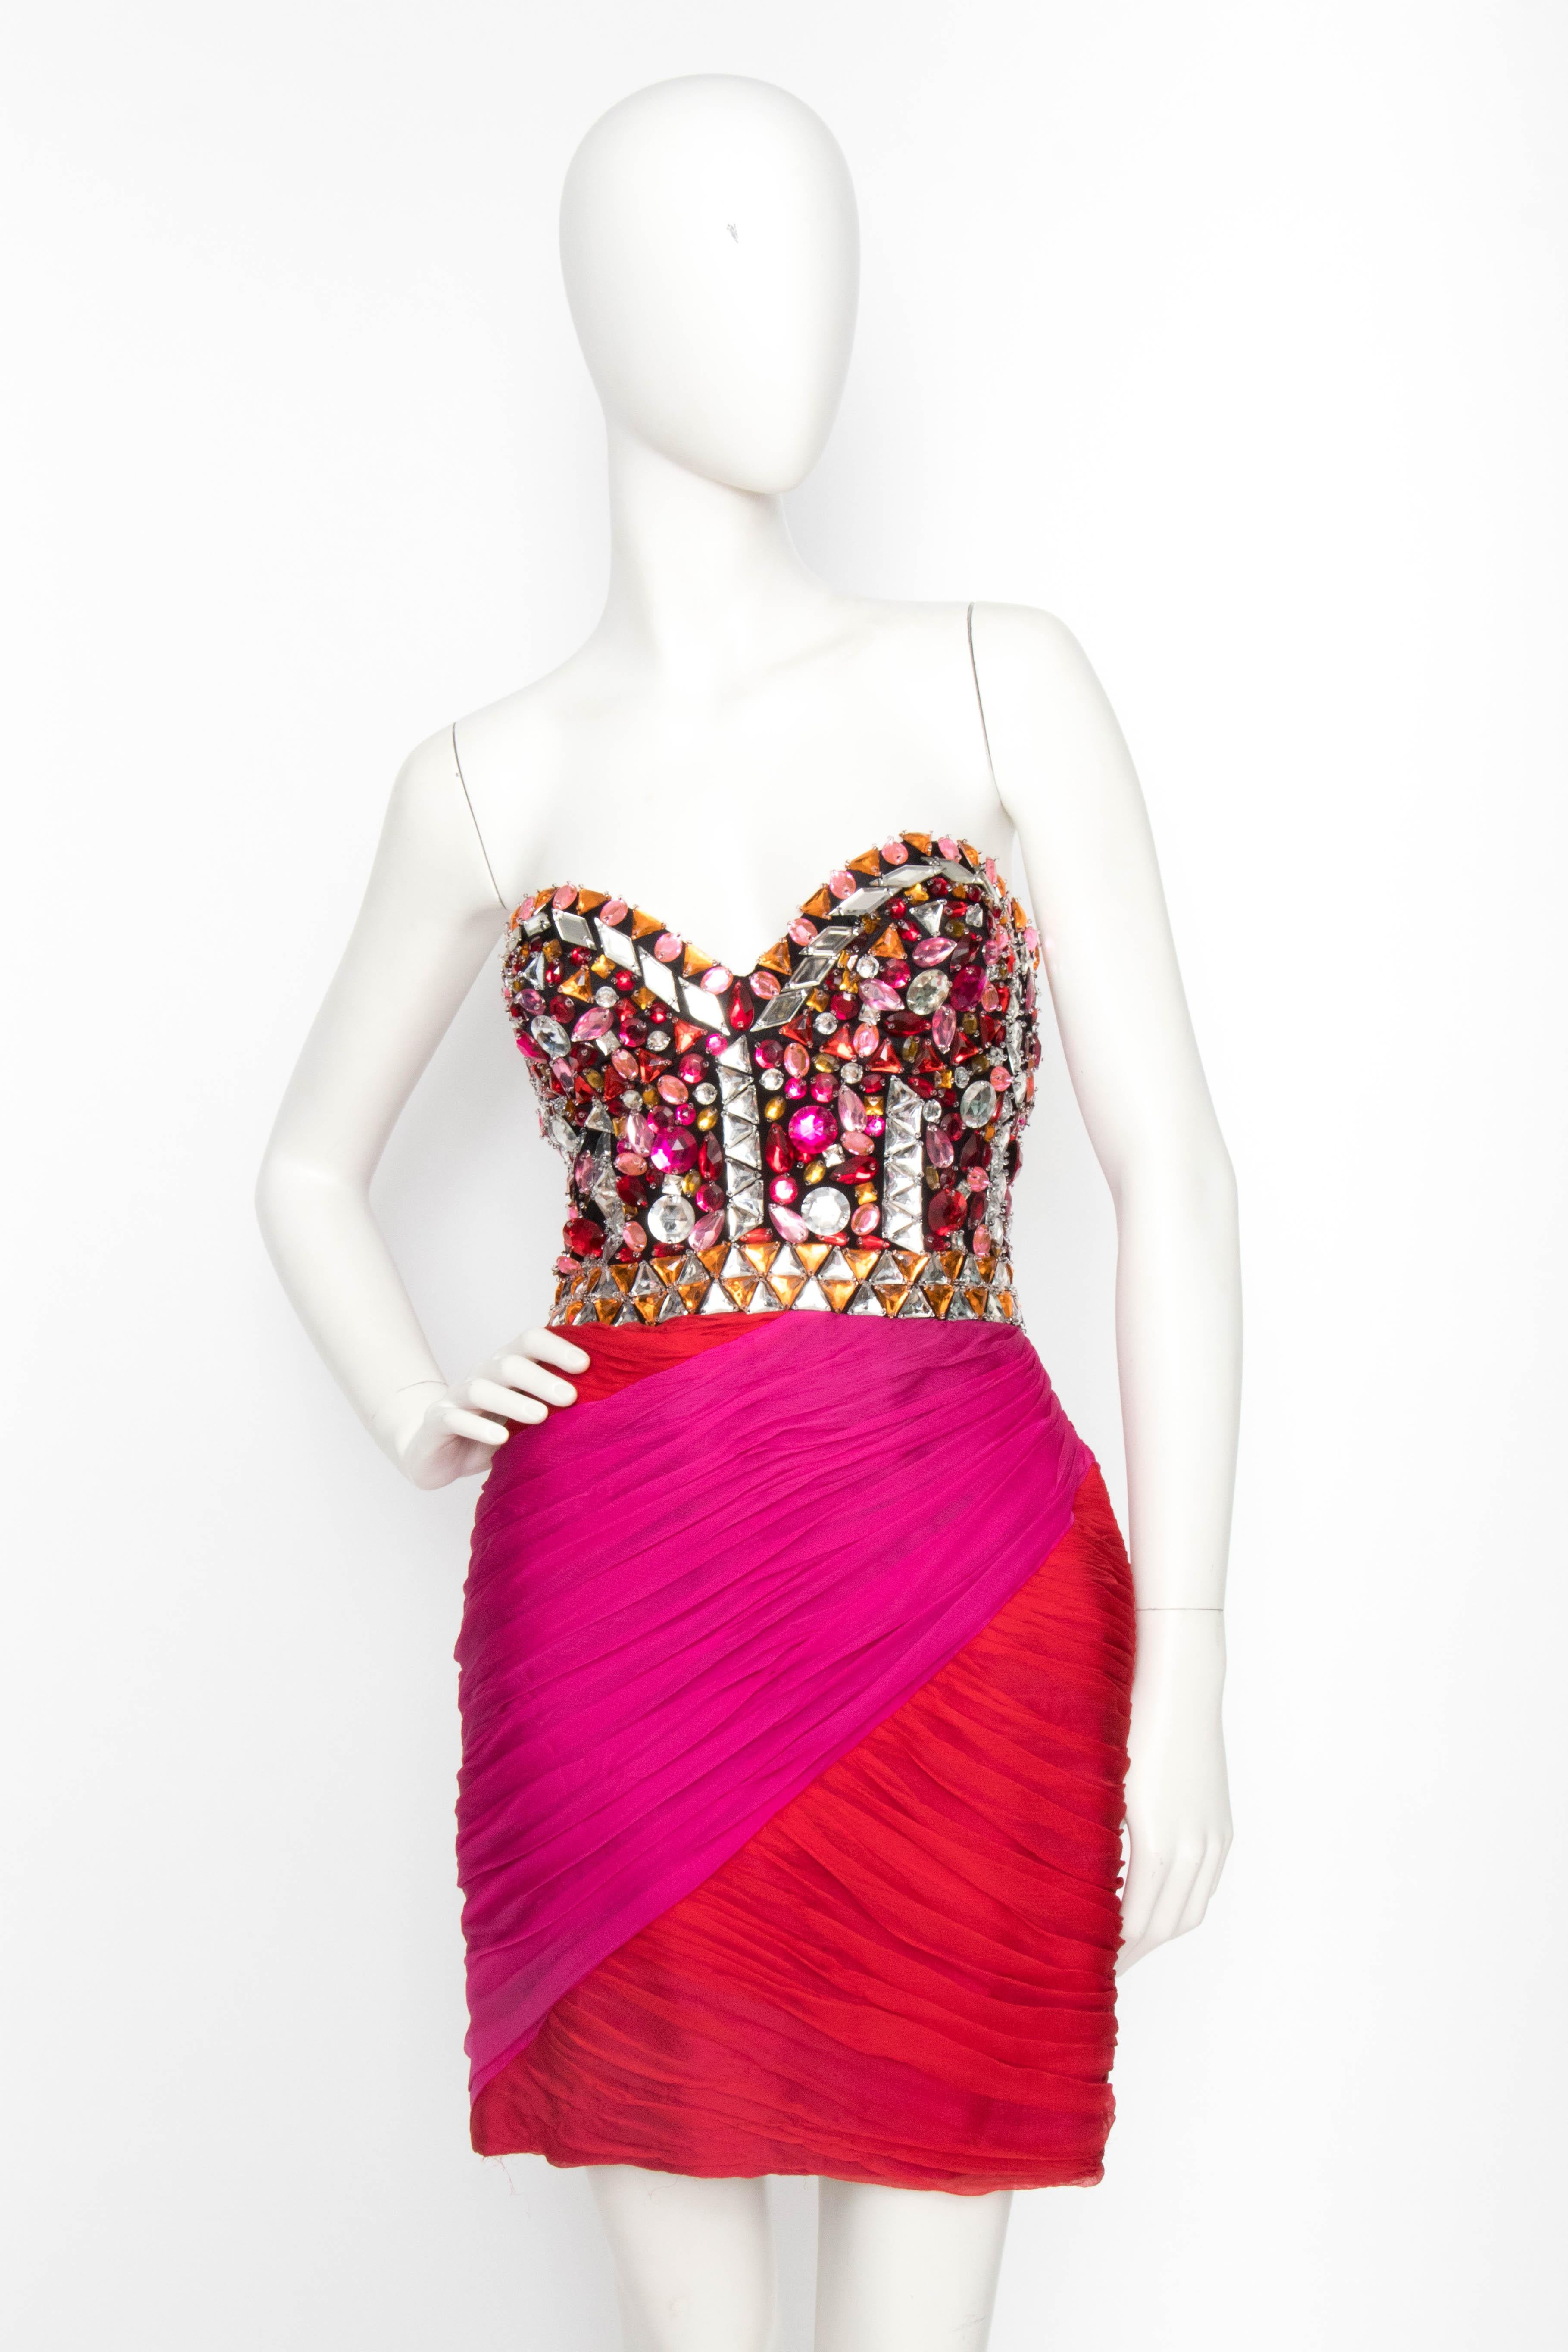 An incredibly glamorous 1980s Loris Azzaro pink and red silk chiffon cocktail dress with a ruched mini-skirt and bejewelled bustier. The dress comes with a chiffon shawl in matching red and pink with a rhinestone setting in the center. The dress is